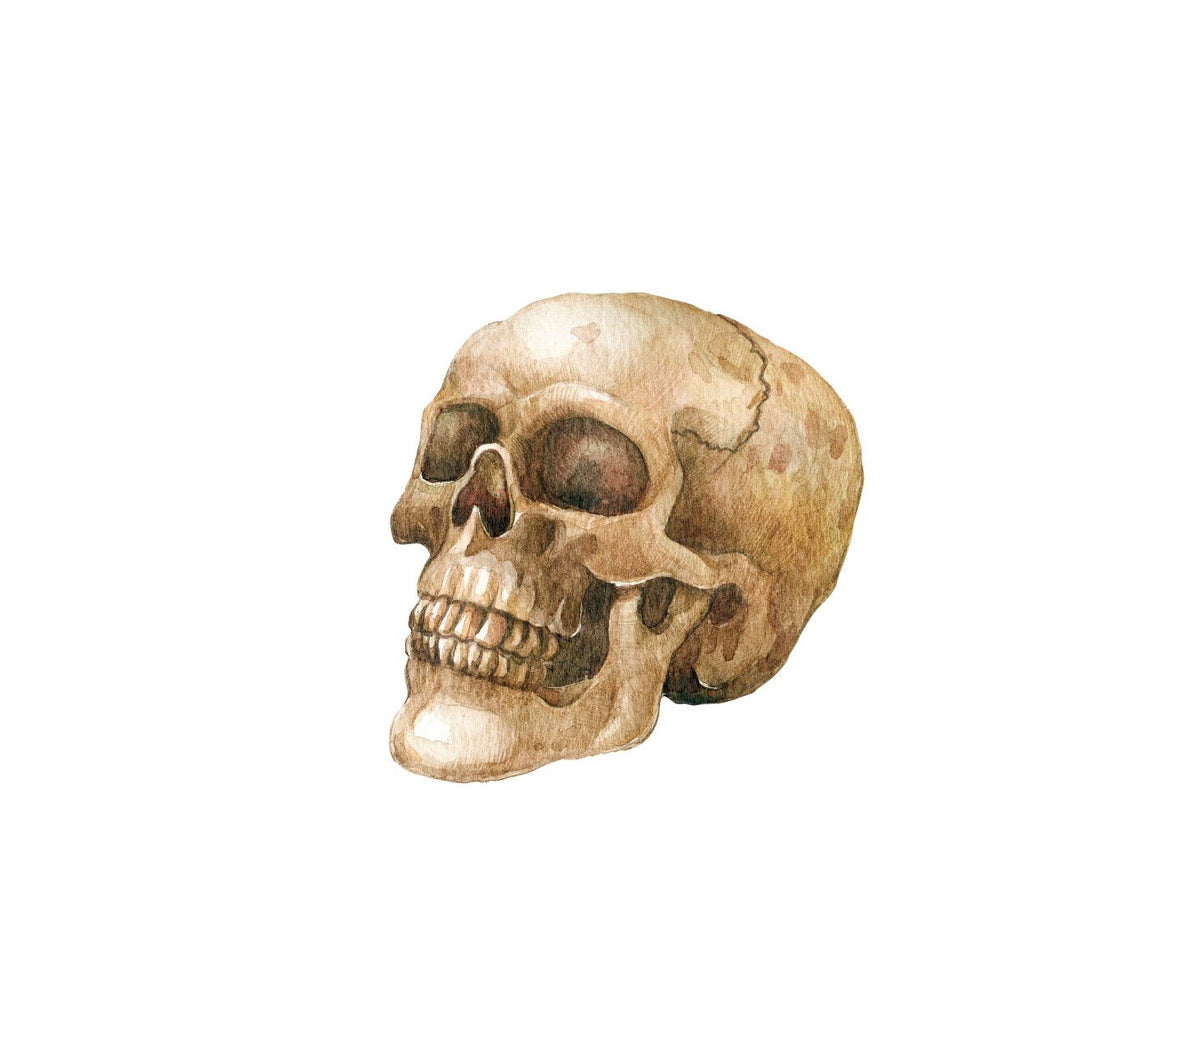 A watercolor and pencil illustration of a Cover-Alls Skull Decal with a detailed texture, depicted in a realistic style against a white background.